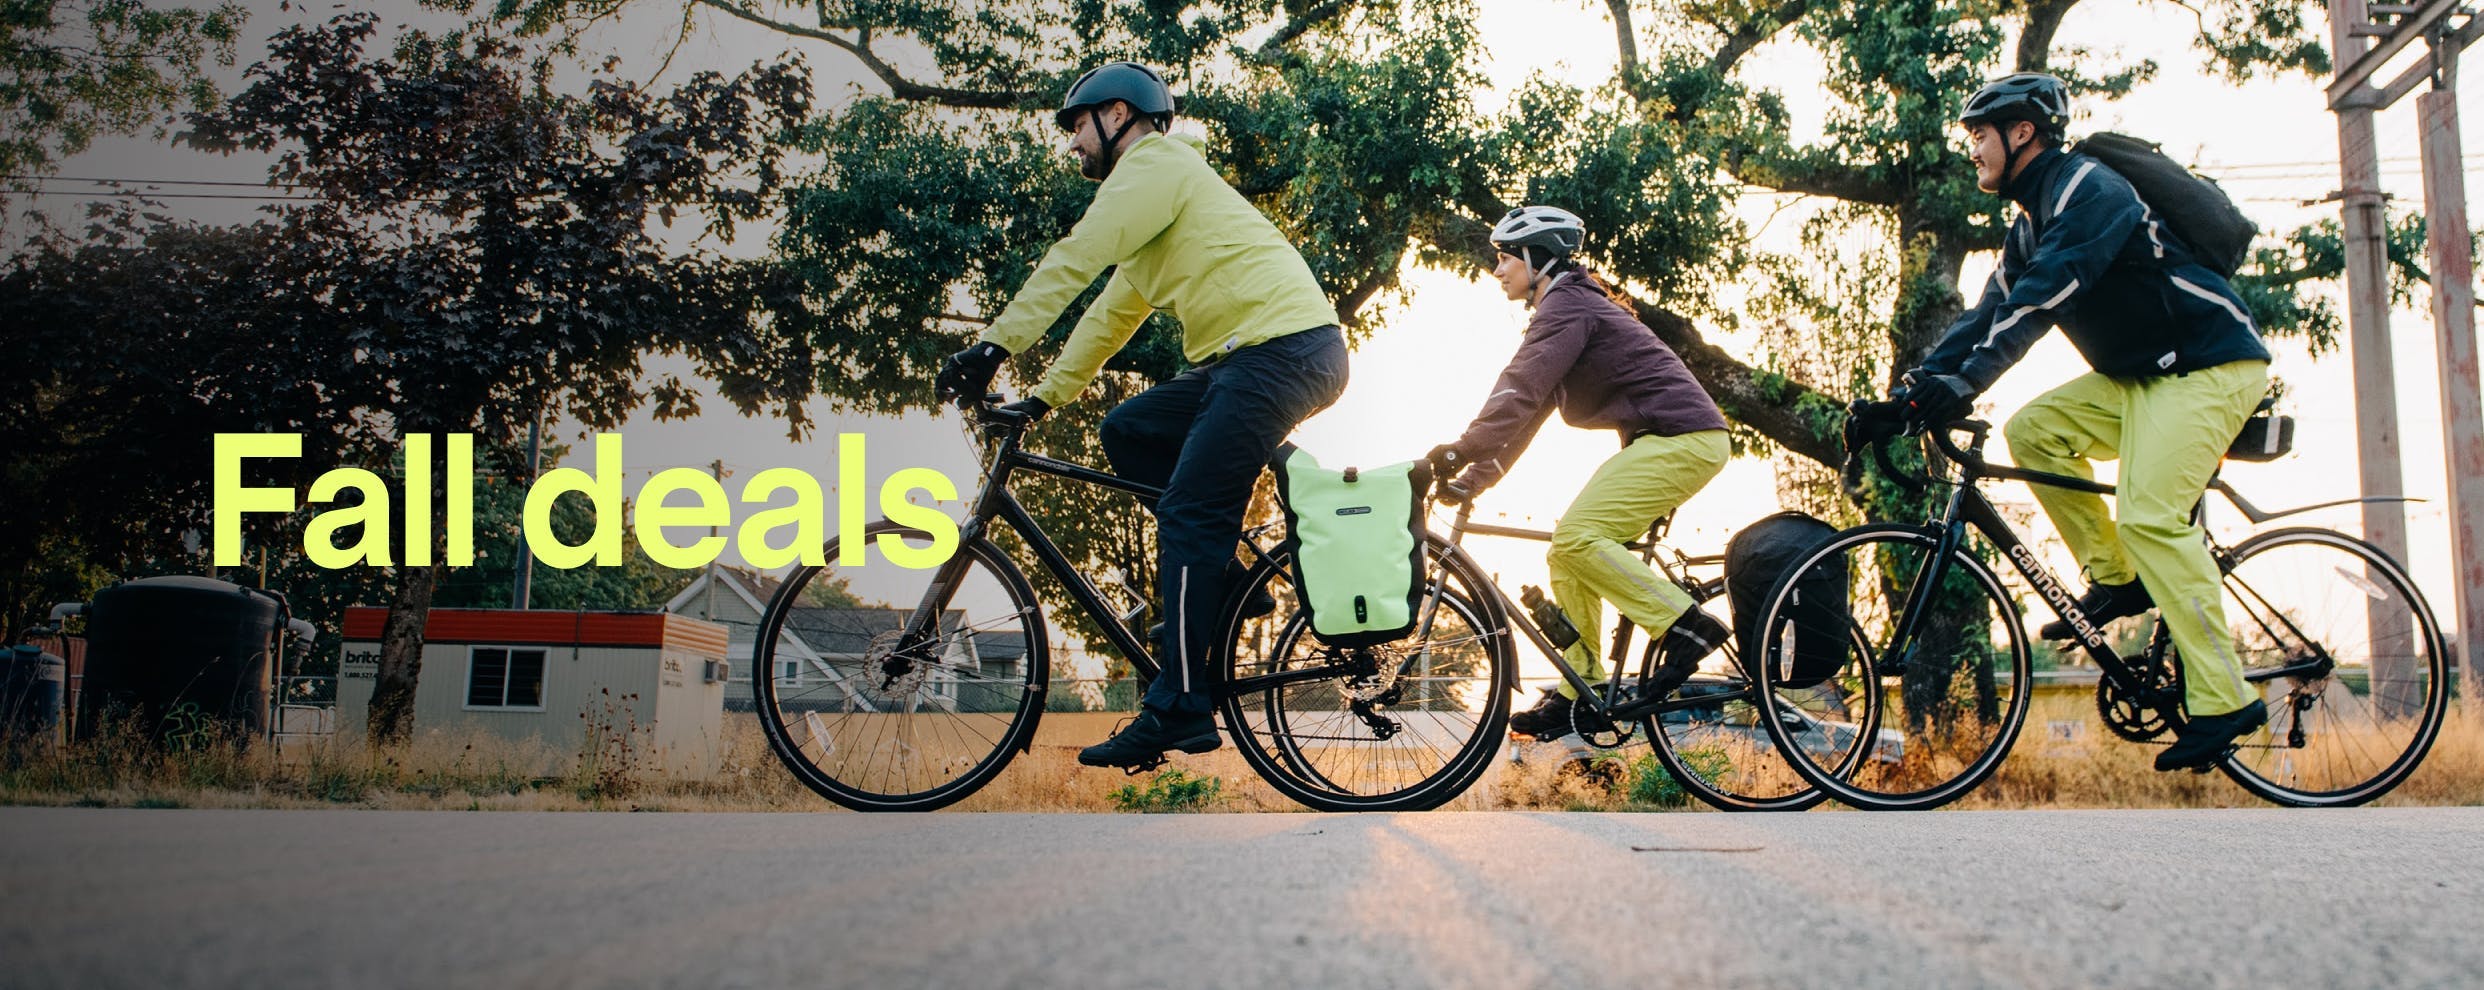 25% off MEC bike gear. Boost your commuter kit or build your home mechanic set-up. Select styles, ends October 4.